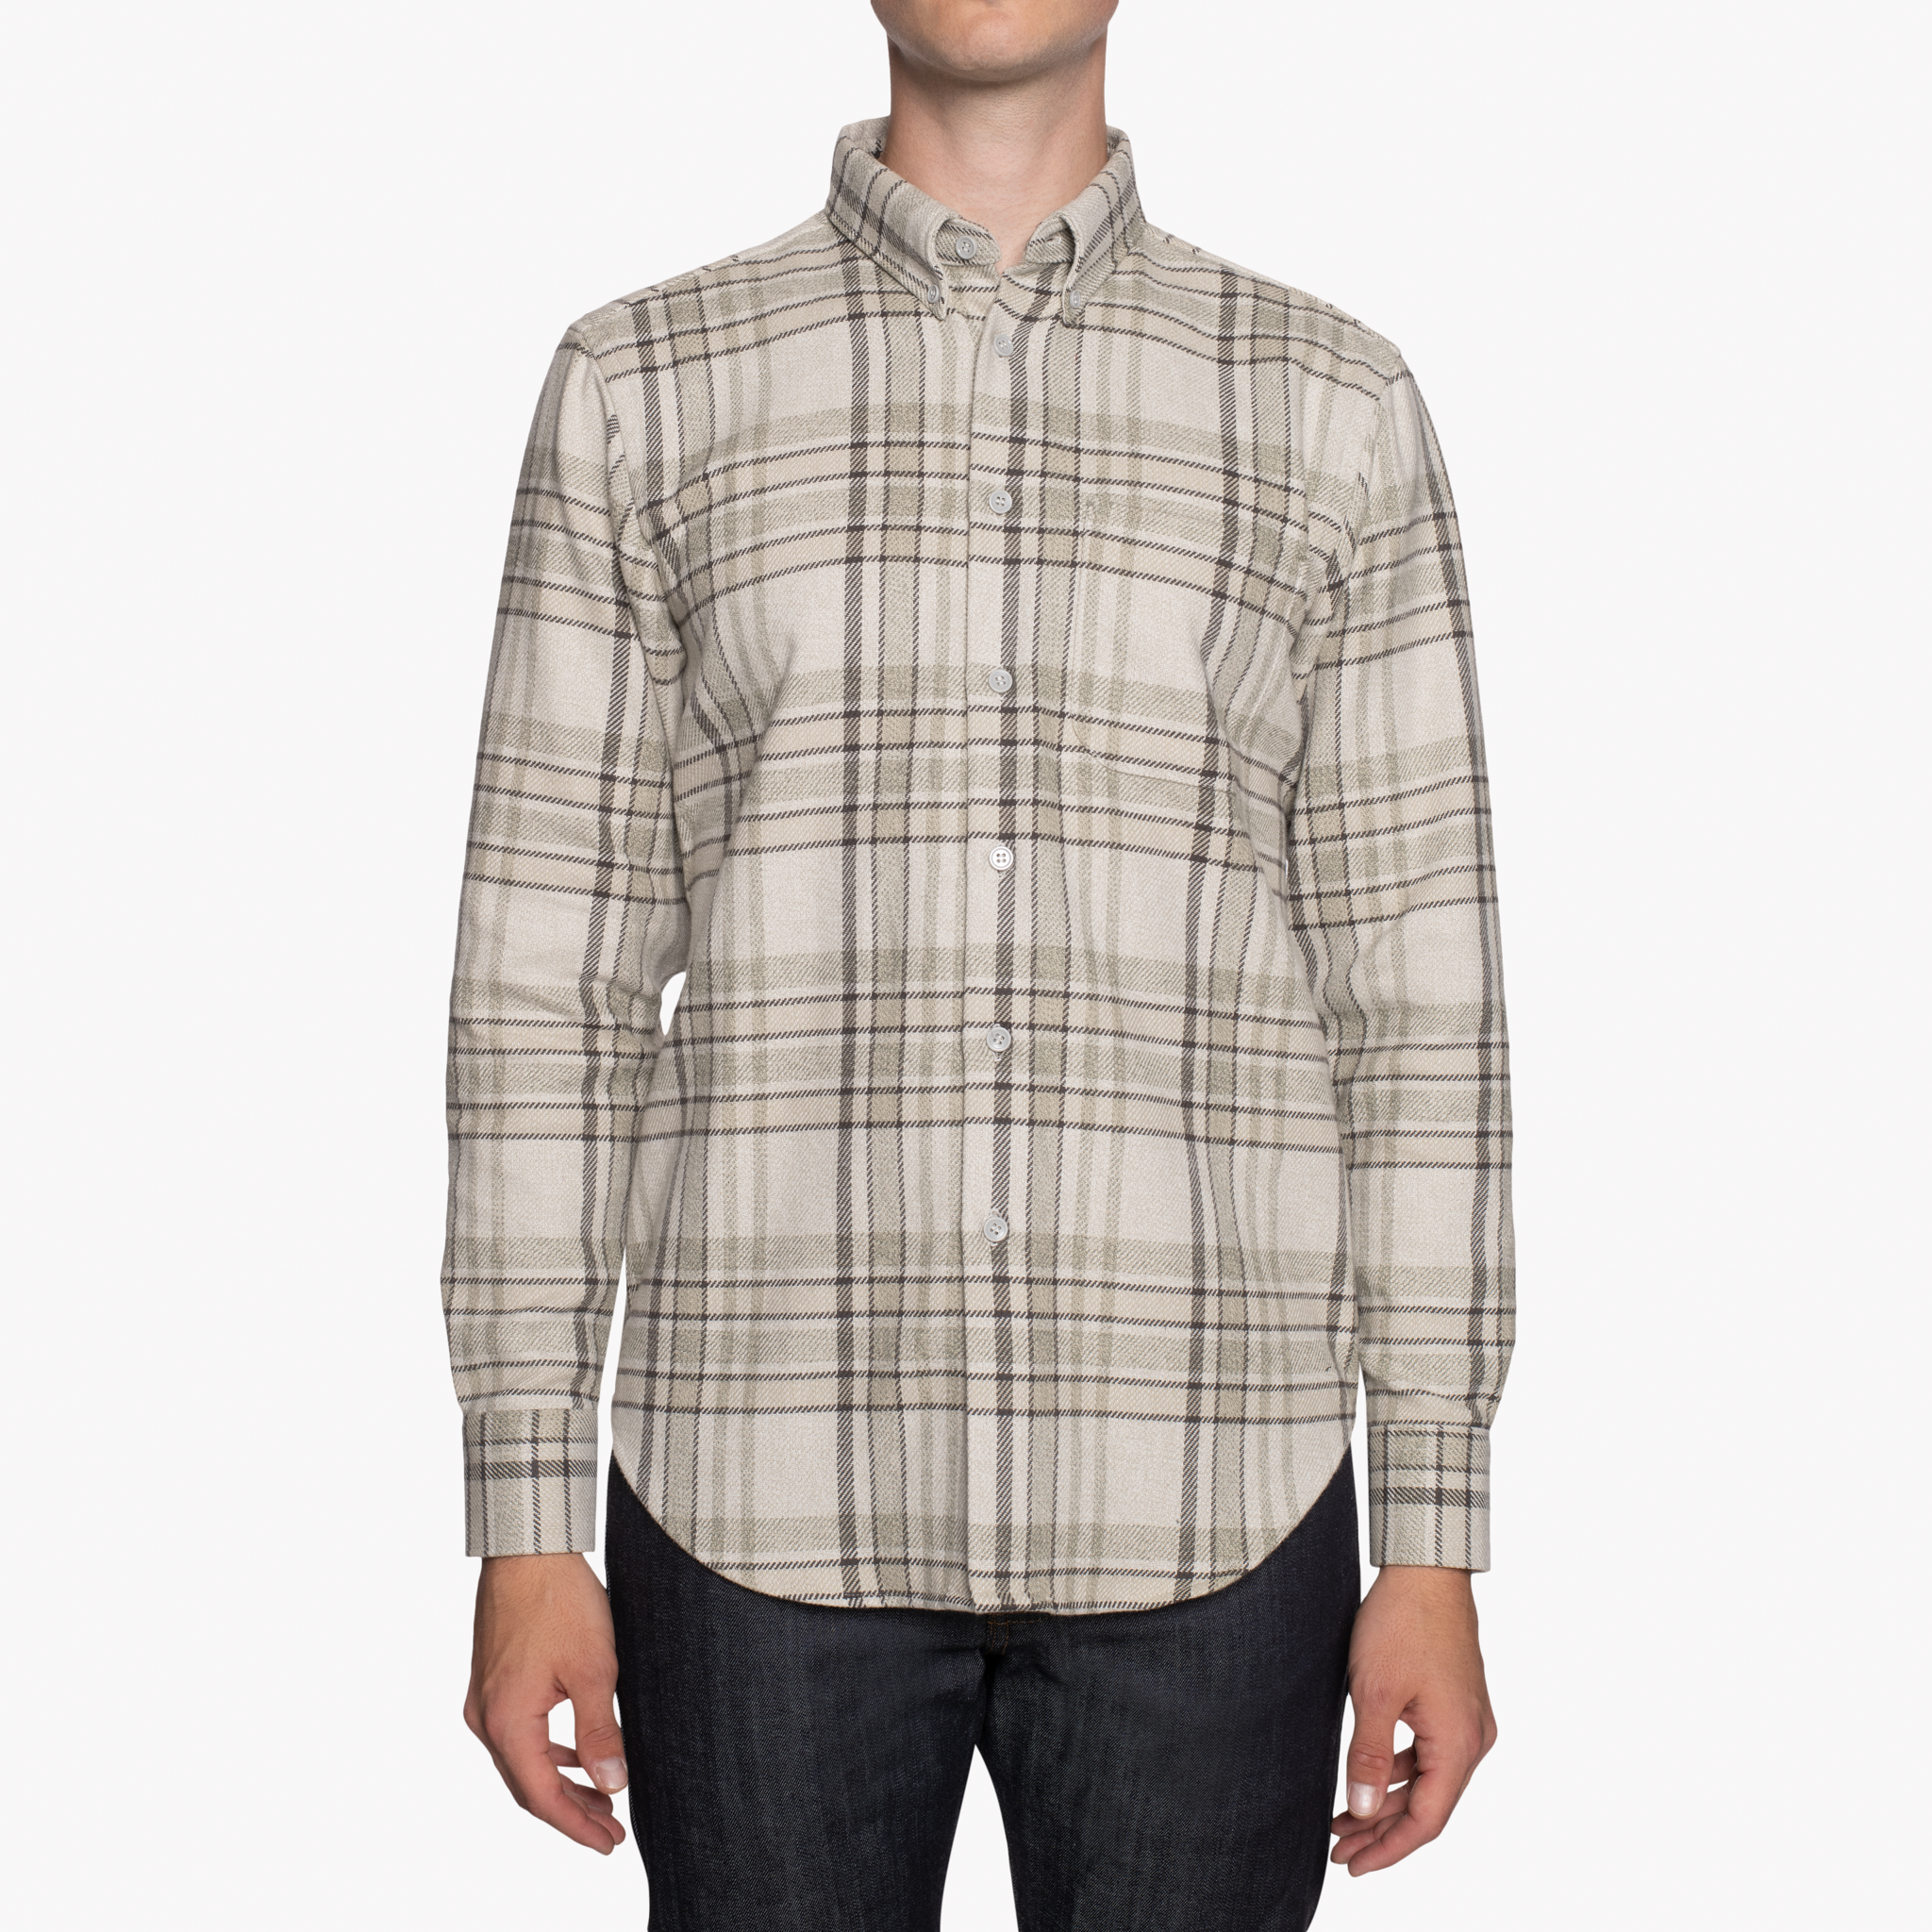  Easy Shirt - Heavy Vintage Flannel - Pale Grey - front 